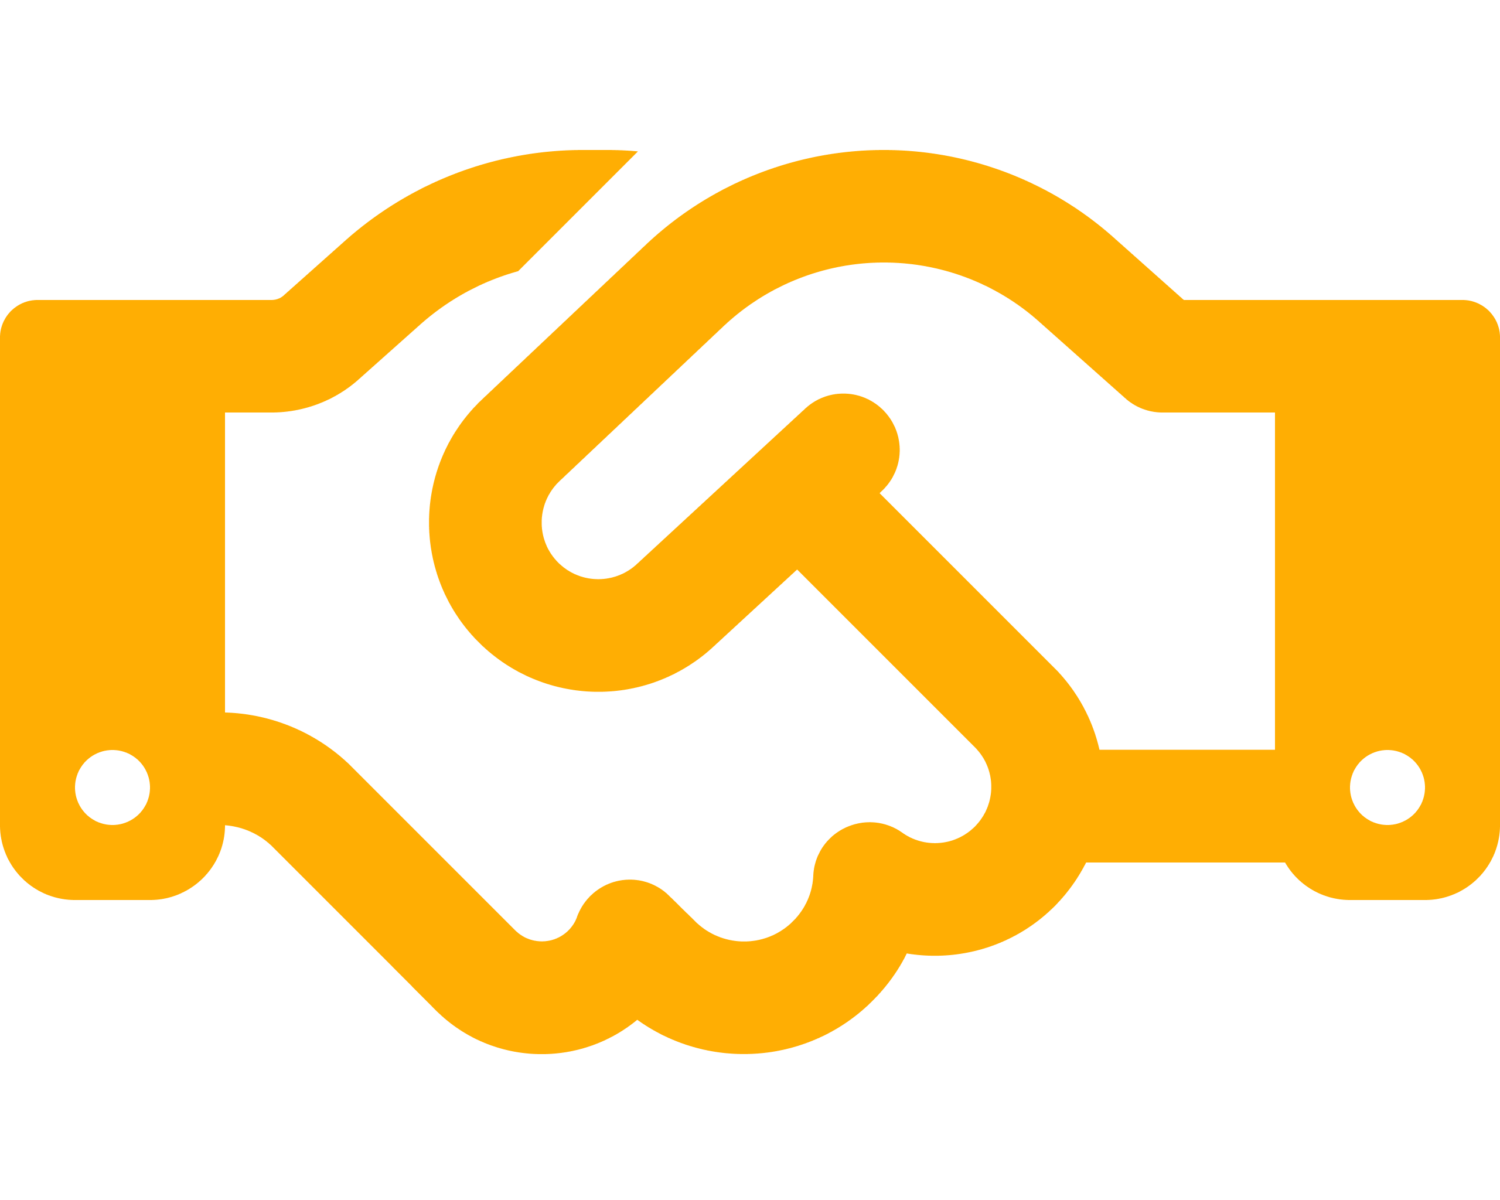 handshake icon in gold